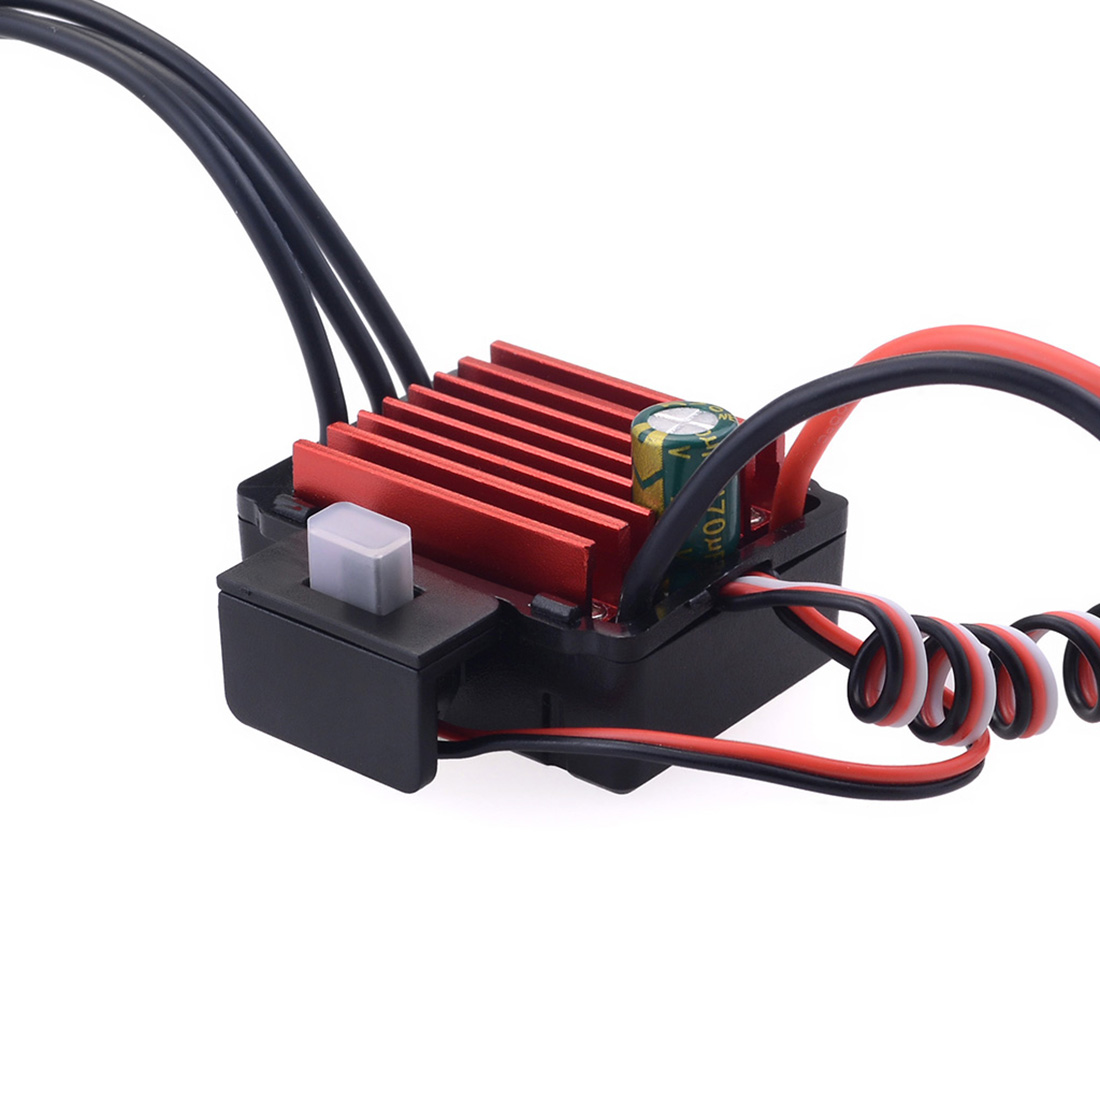 35A brushless Motor ESC Waterproof 2-3S Lipo programmable  for 1/14 1/16 RC Car